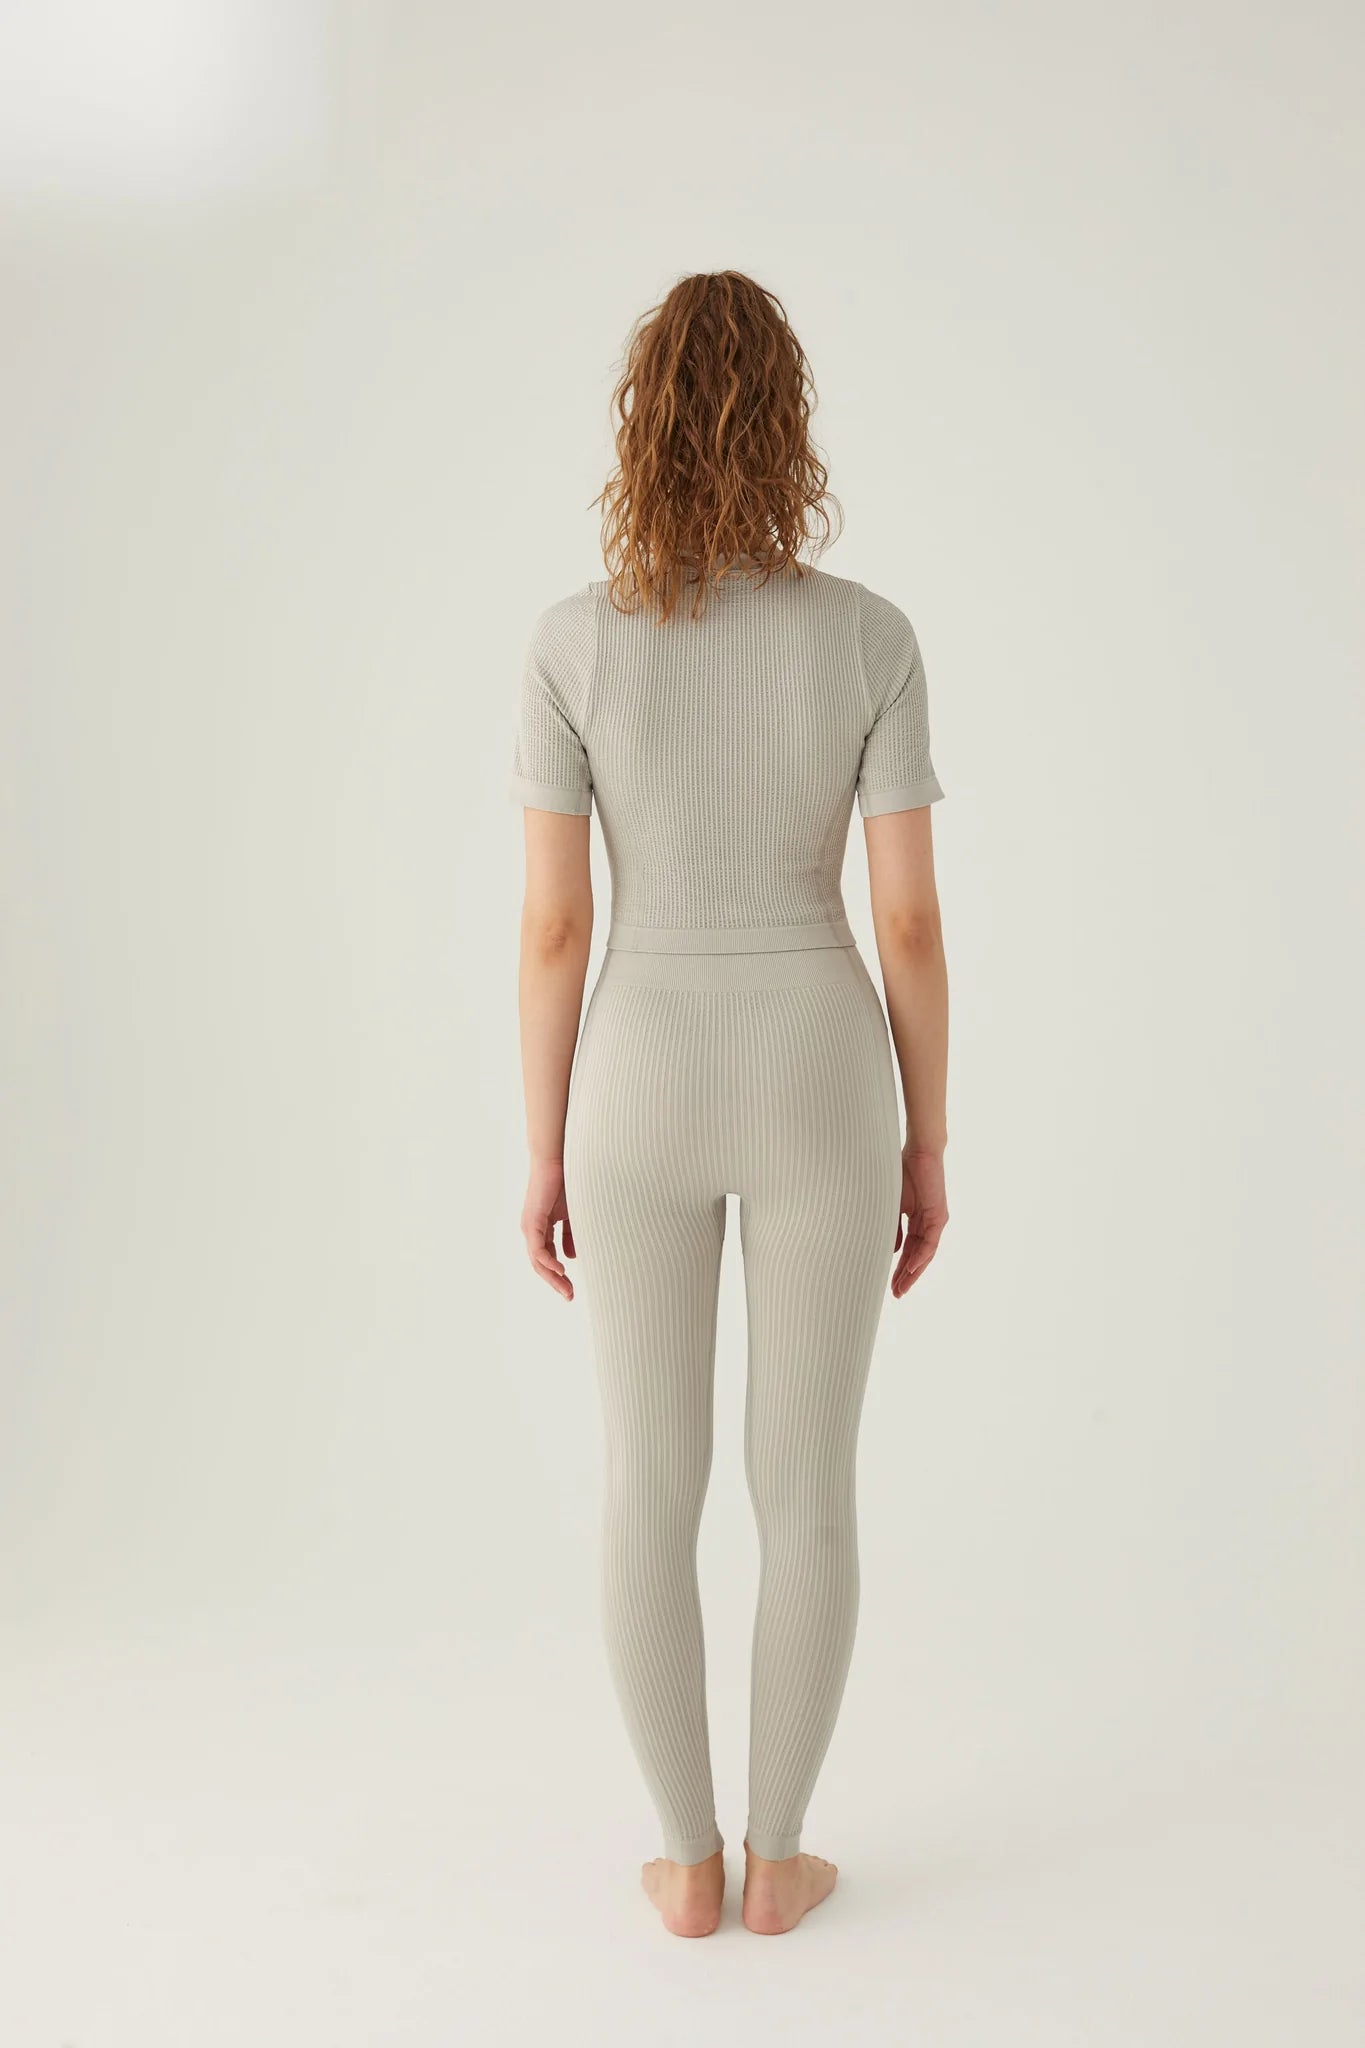 Form & Grace Seamless Ribbed Leggings With Contrast Zip Dove Grey - Gym Leggings - British D'sire